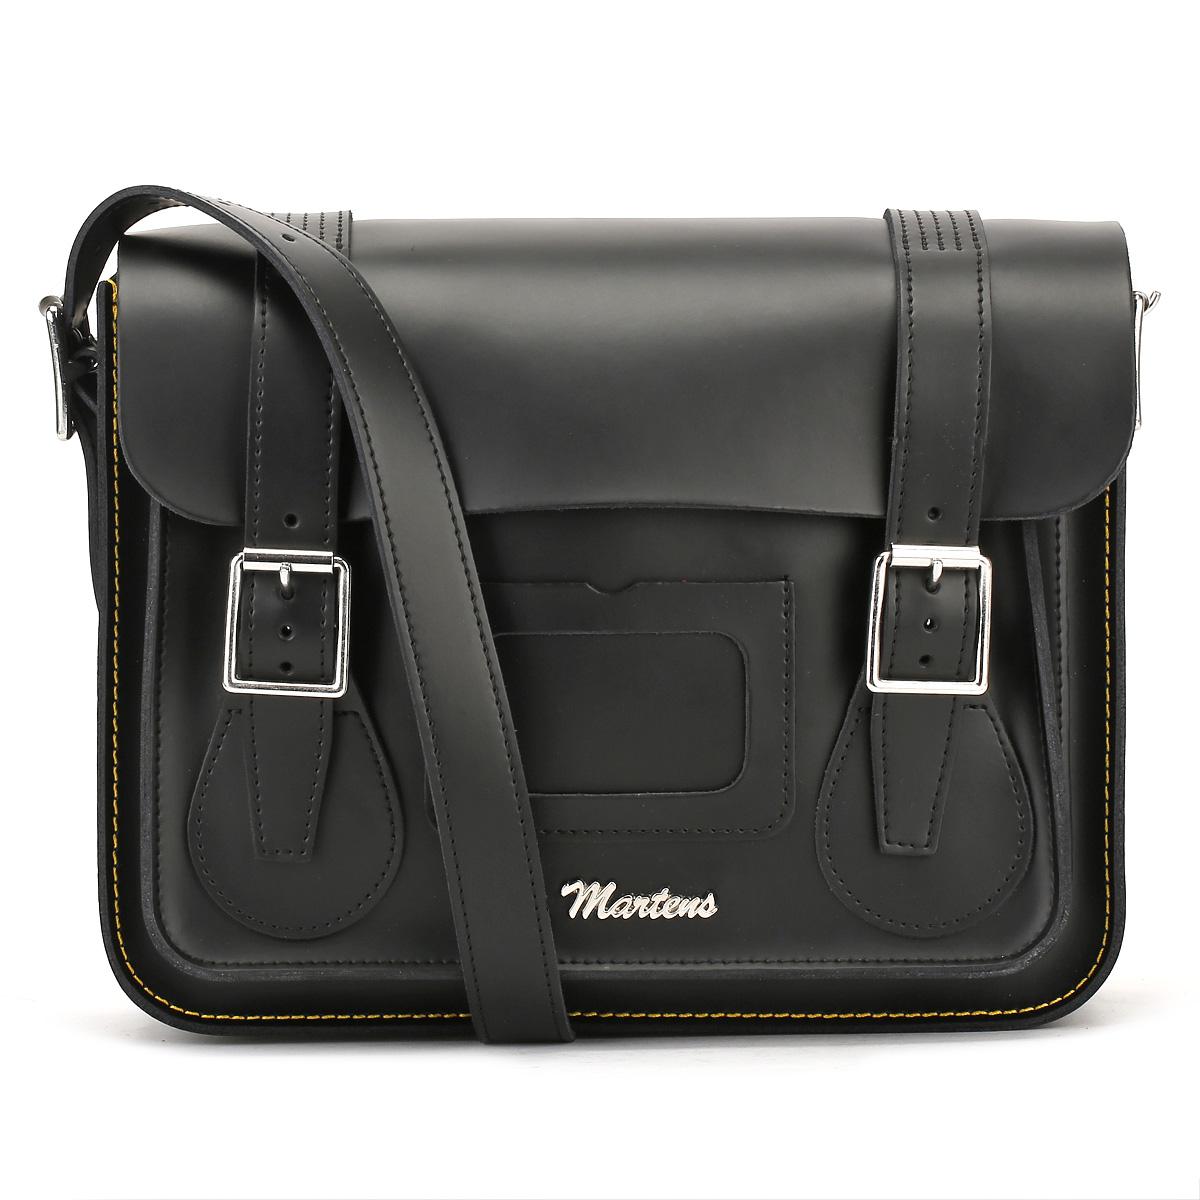 Buy > dr martens 11 inch leather satchel > in stock